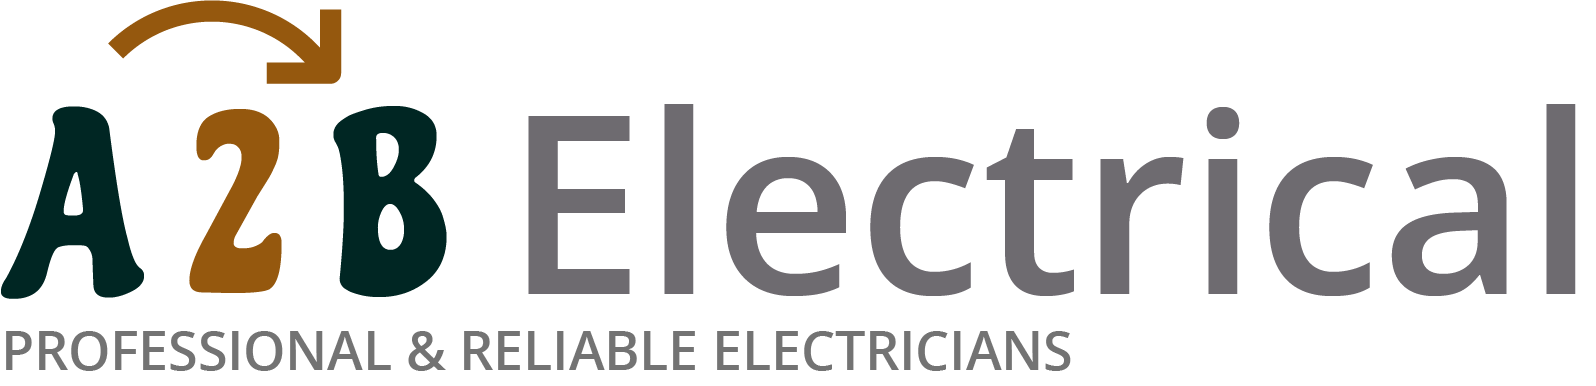 If you have electrical wiring problems in Dereham, we can provide an electrician to have a look for you. 